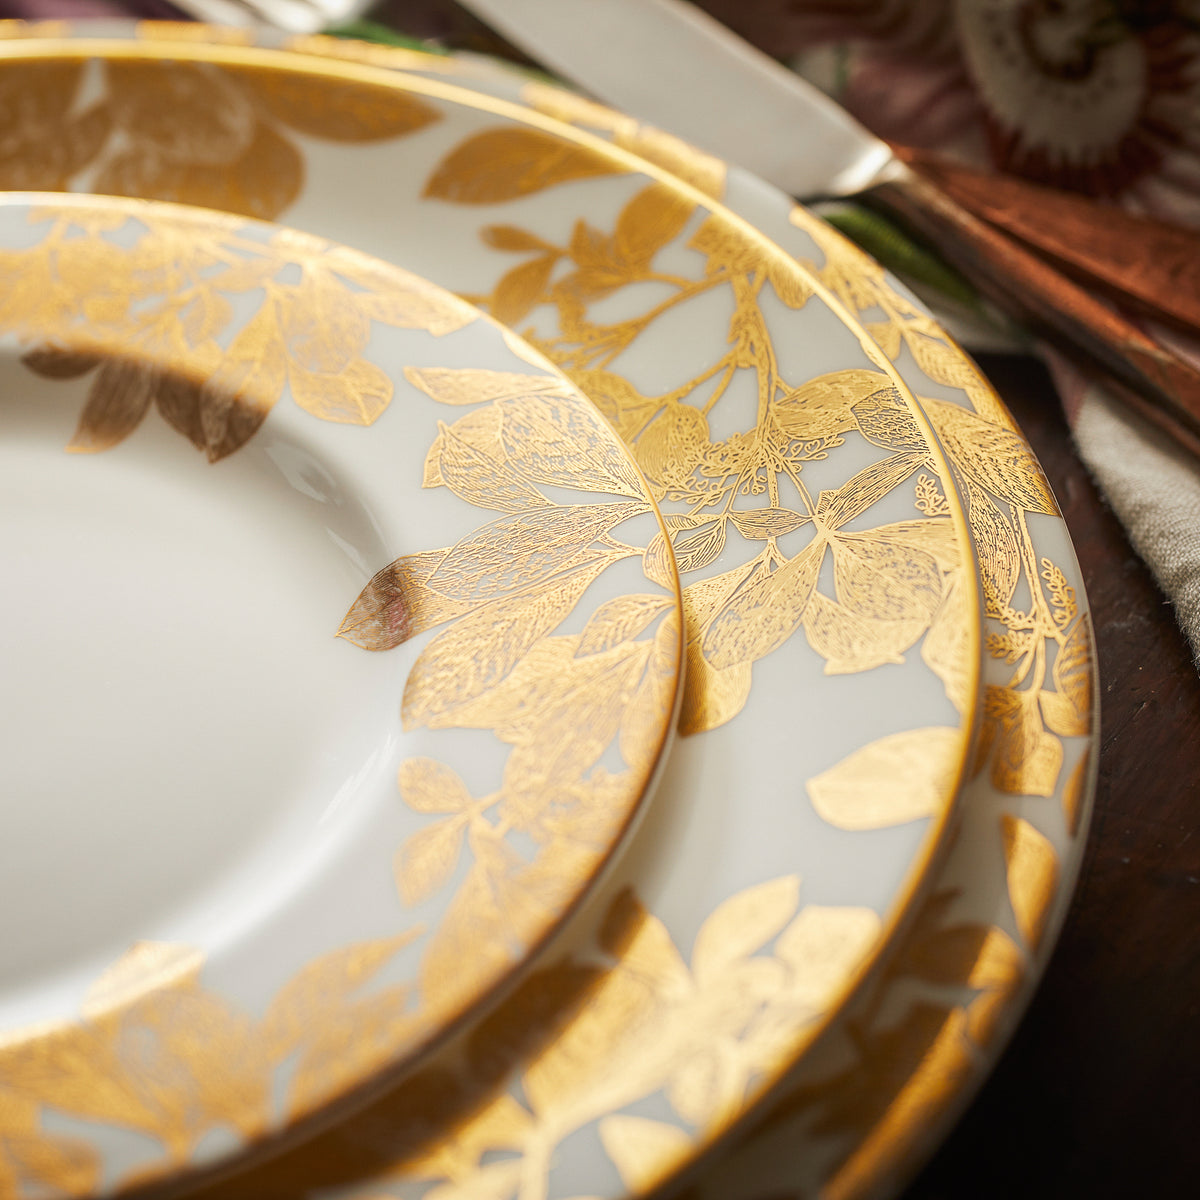 Close-up of three overlapping Arbor Gold Rimmed Charger plates by Caskata Artisanal Home with intricate gold leaf and botanical details on their rims, placed on a wooden surface.